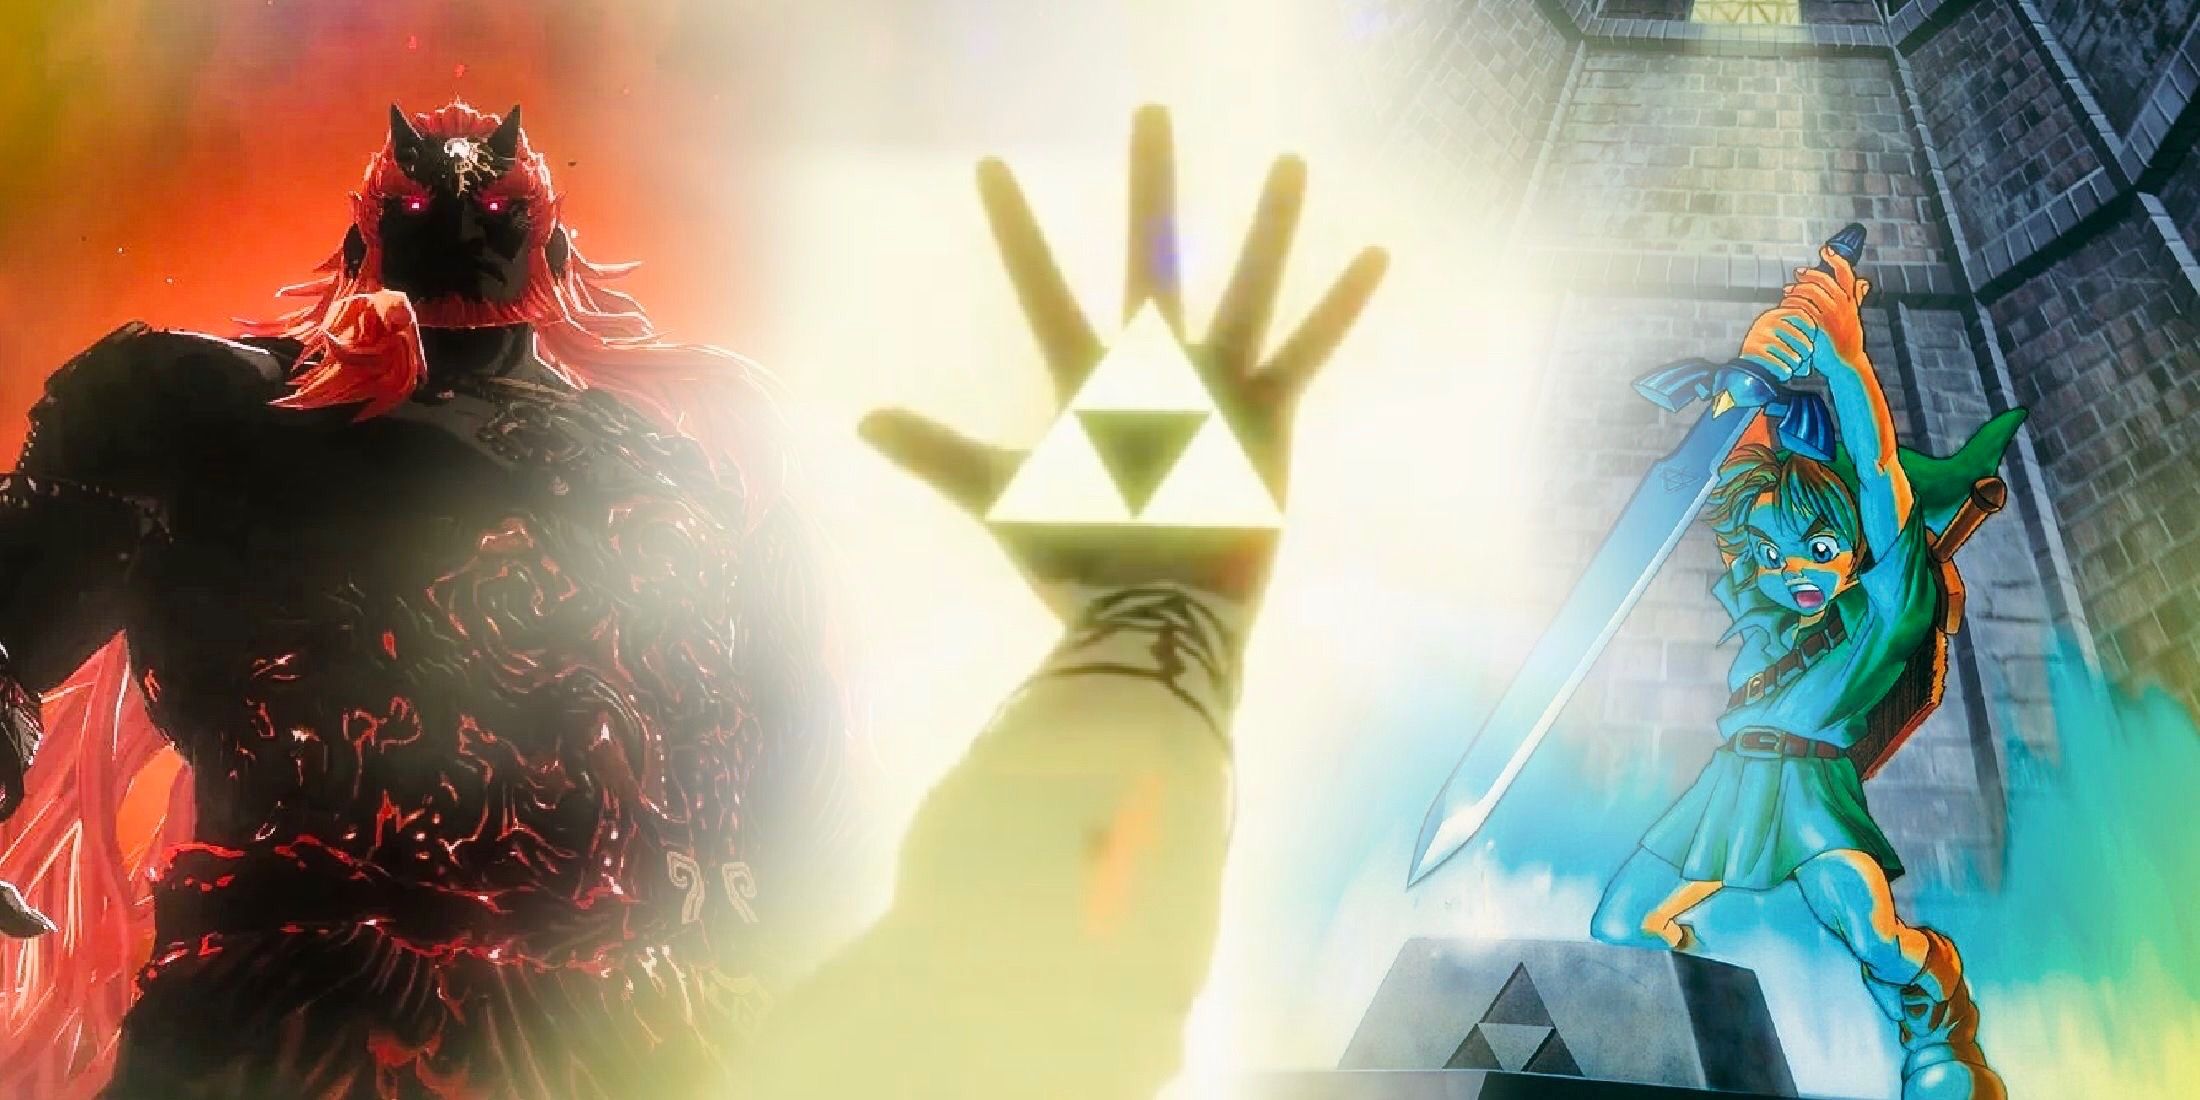 Princess Zelda reaching out with the Triforce to Link from OOT and Ganondorf from TOTK